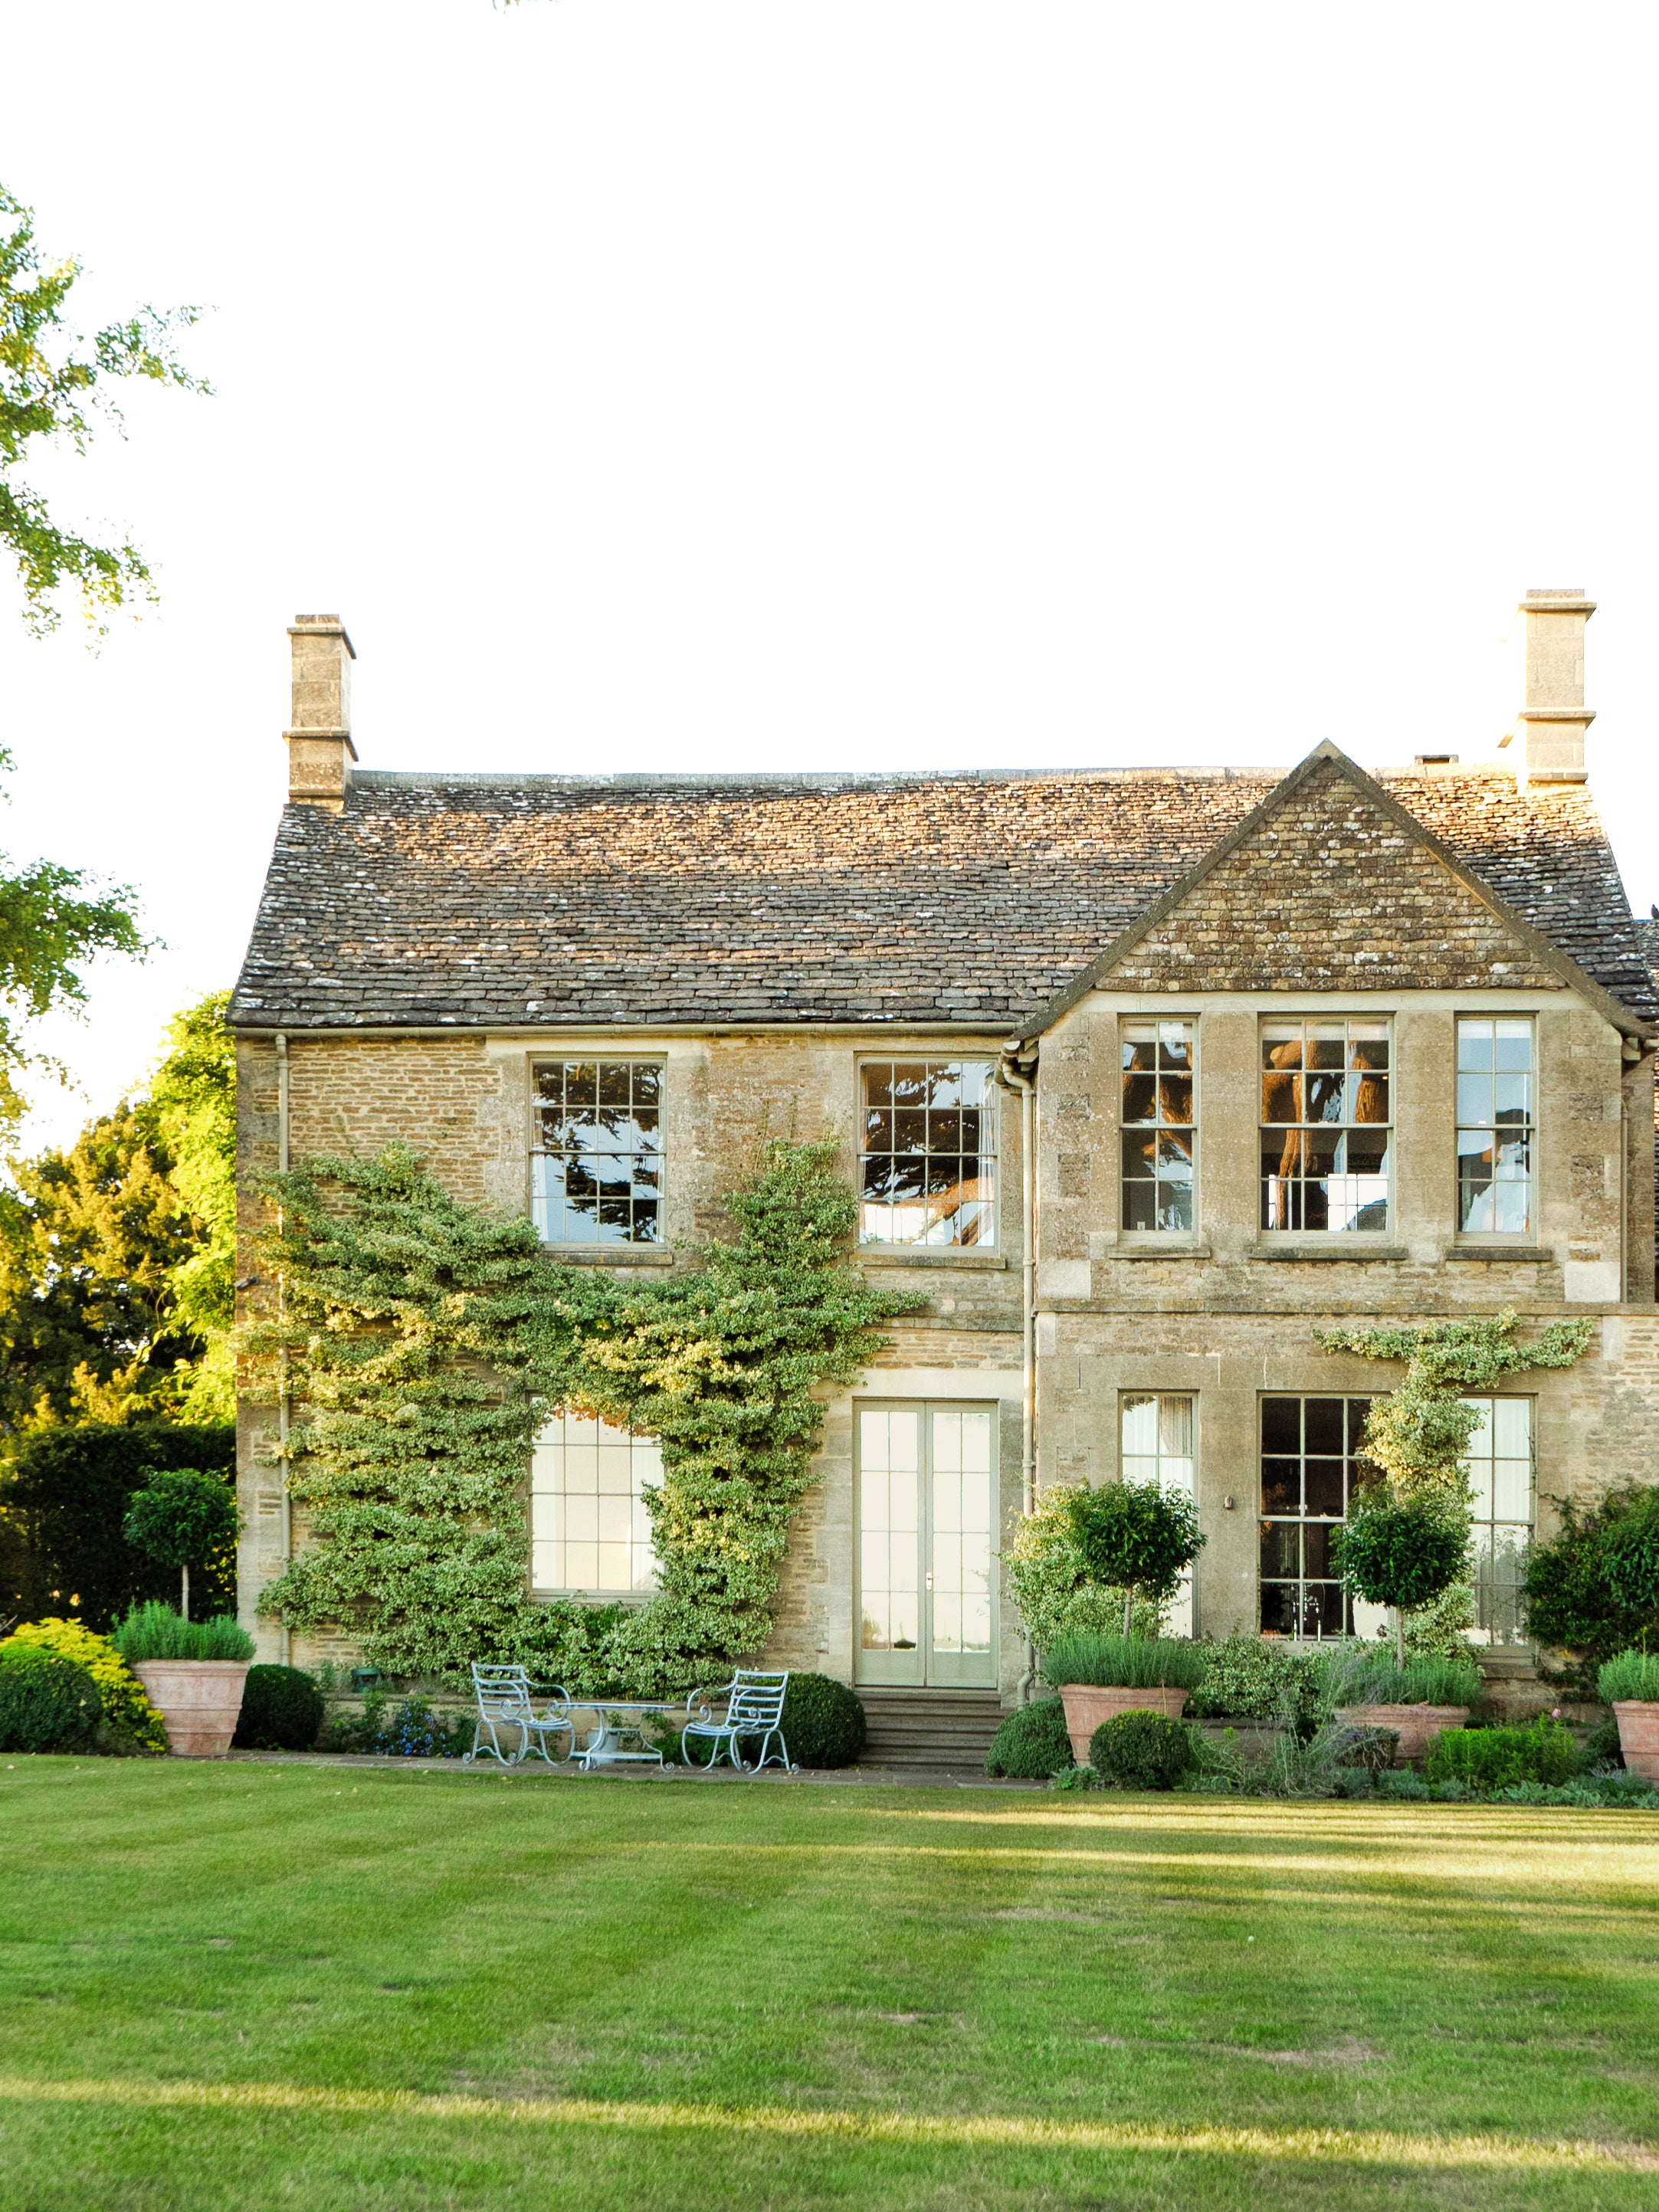 Beyond London: Why the Cotswolds Should Be Your Next Vacation Spot